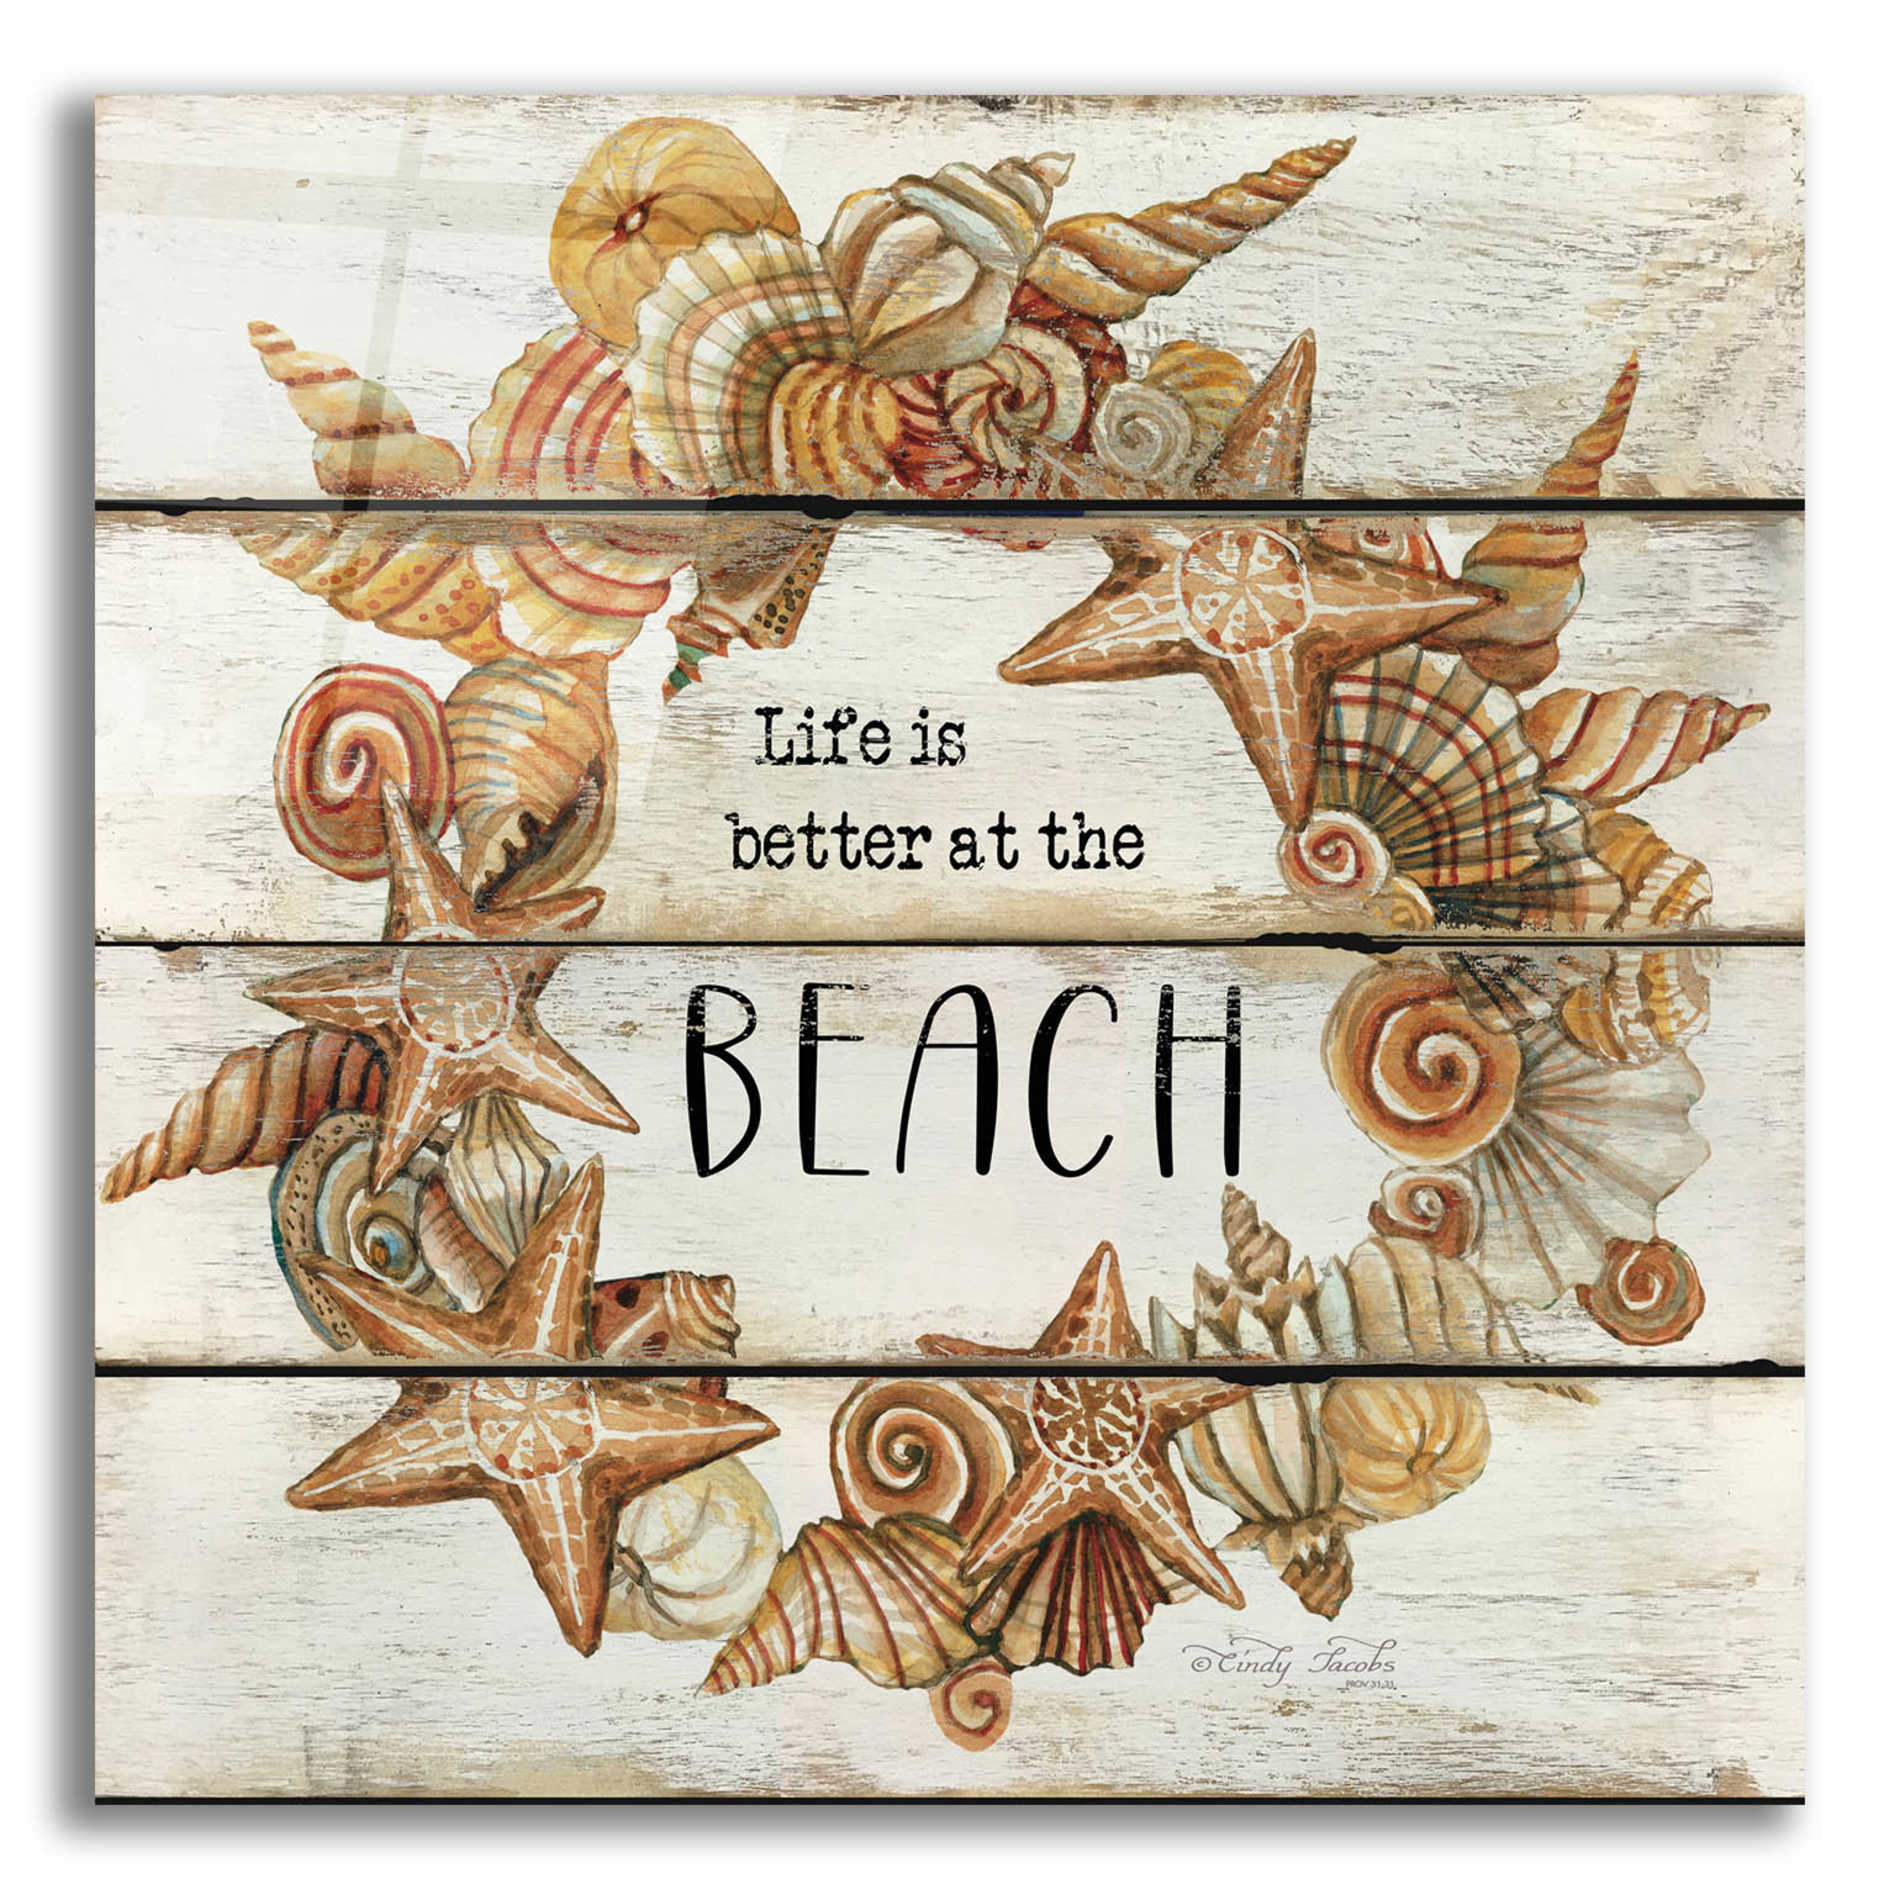 Epic Art 'Life is Better at the Beach' by Cindy Jacobs, Acrylic Glass Wall Art,12x12